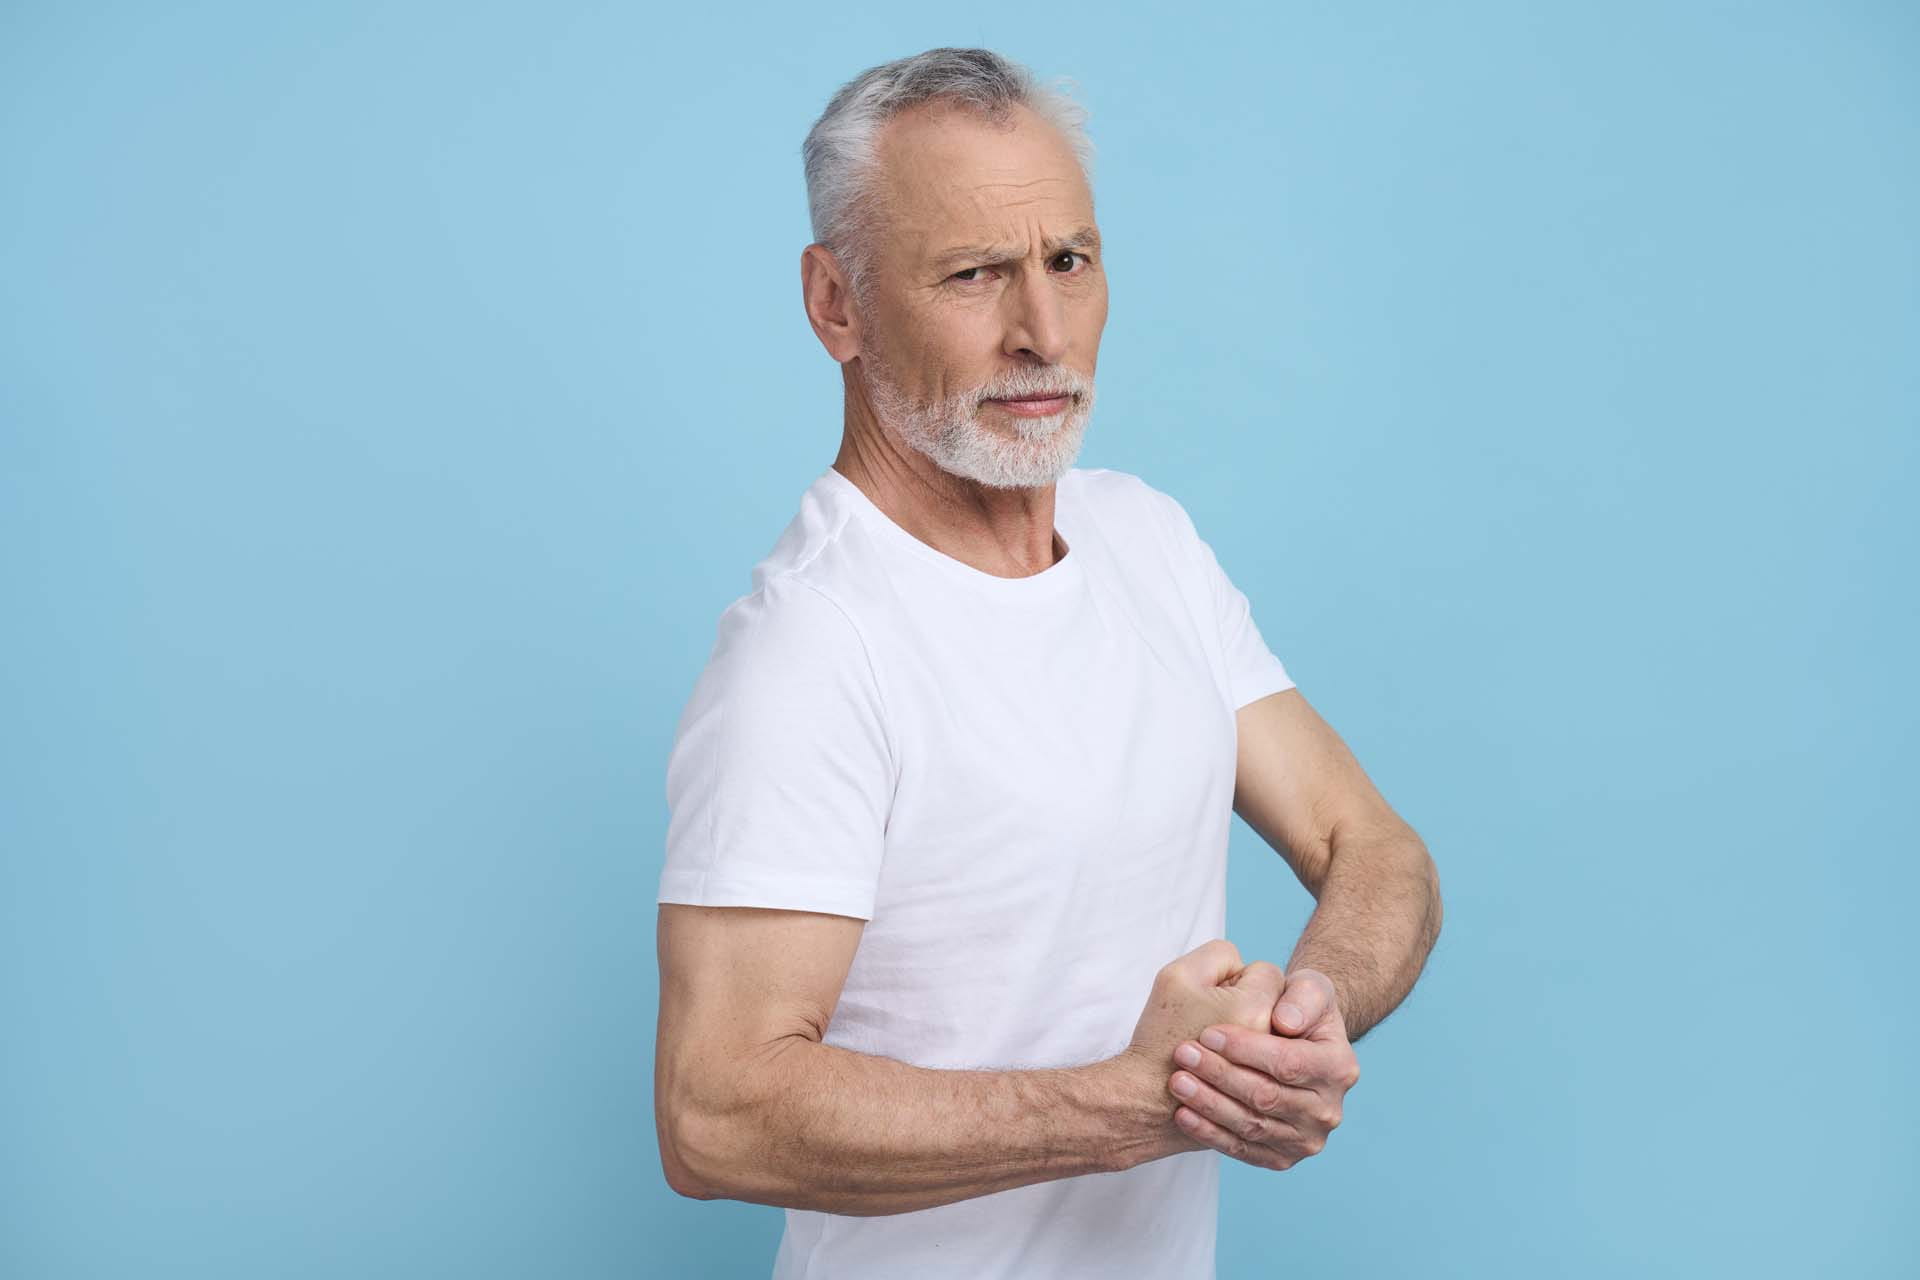 An older man showing off his arm muscles and winking at the camera